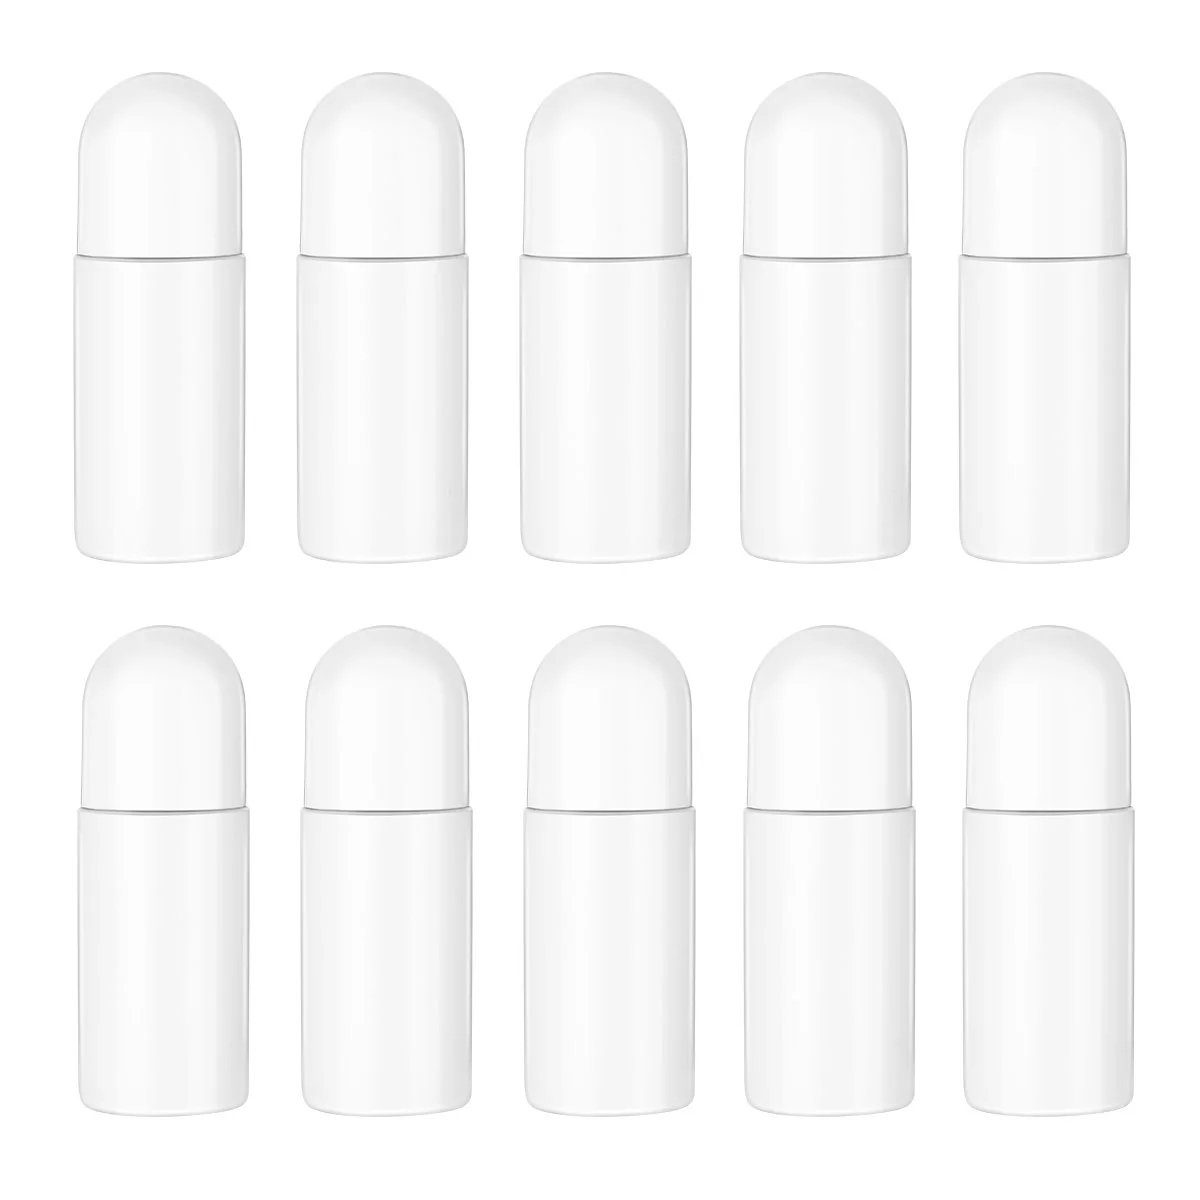 Plastic White Roll On Bottles for Essential Oils Reusable Leak-Proof Deodorant Containers with Plastic Roller Ball bathroom odor proof silicone leak coredown the water pipe draininner sink drain one way drain valve sewer core deodorant